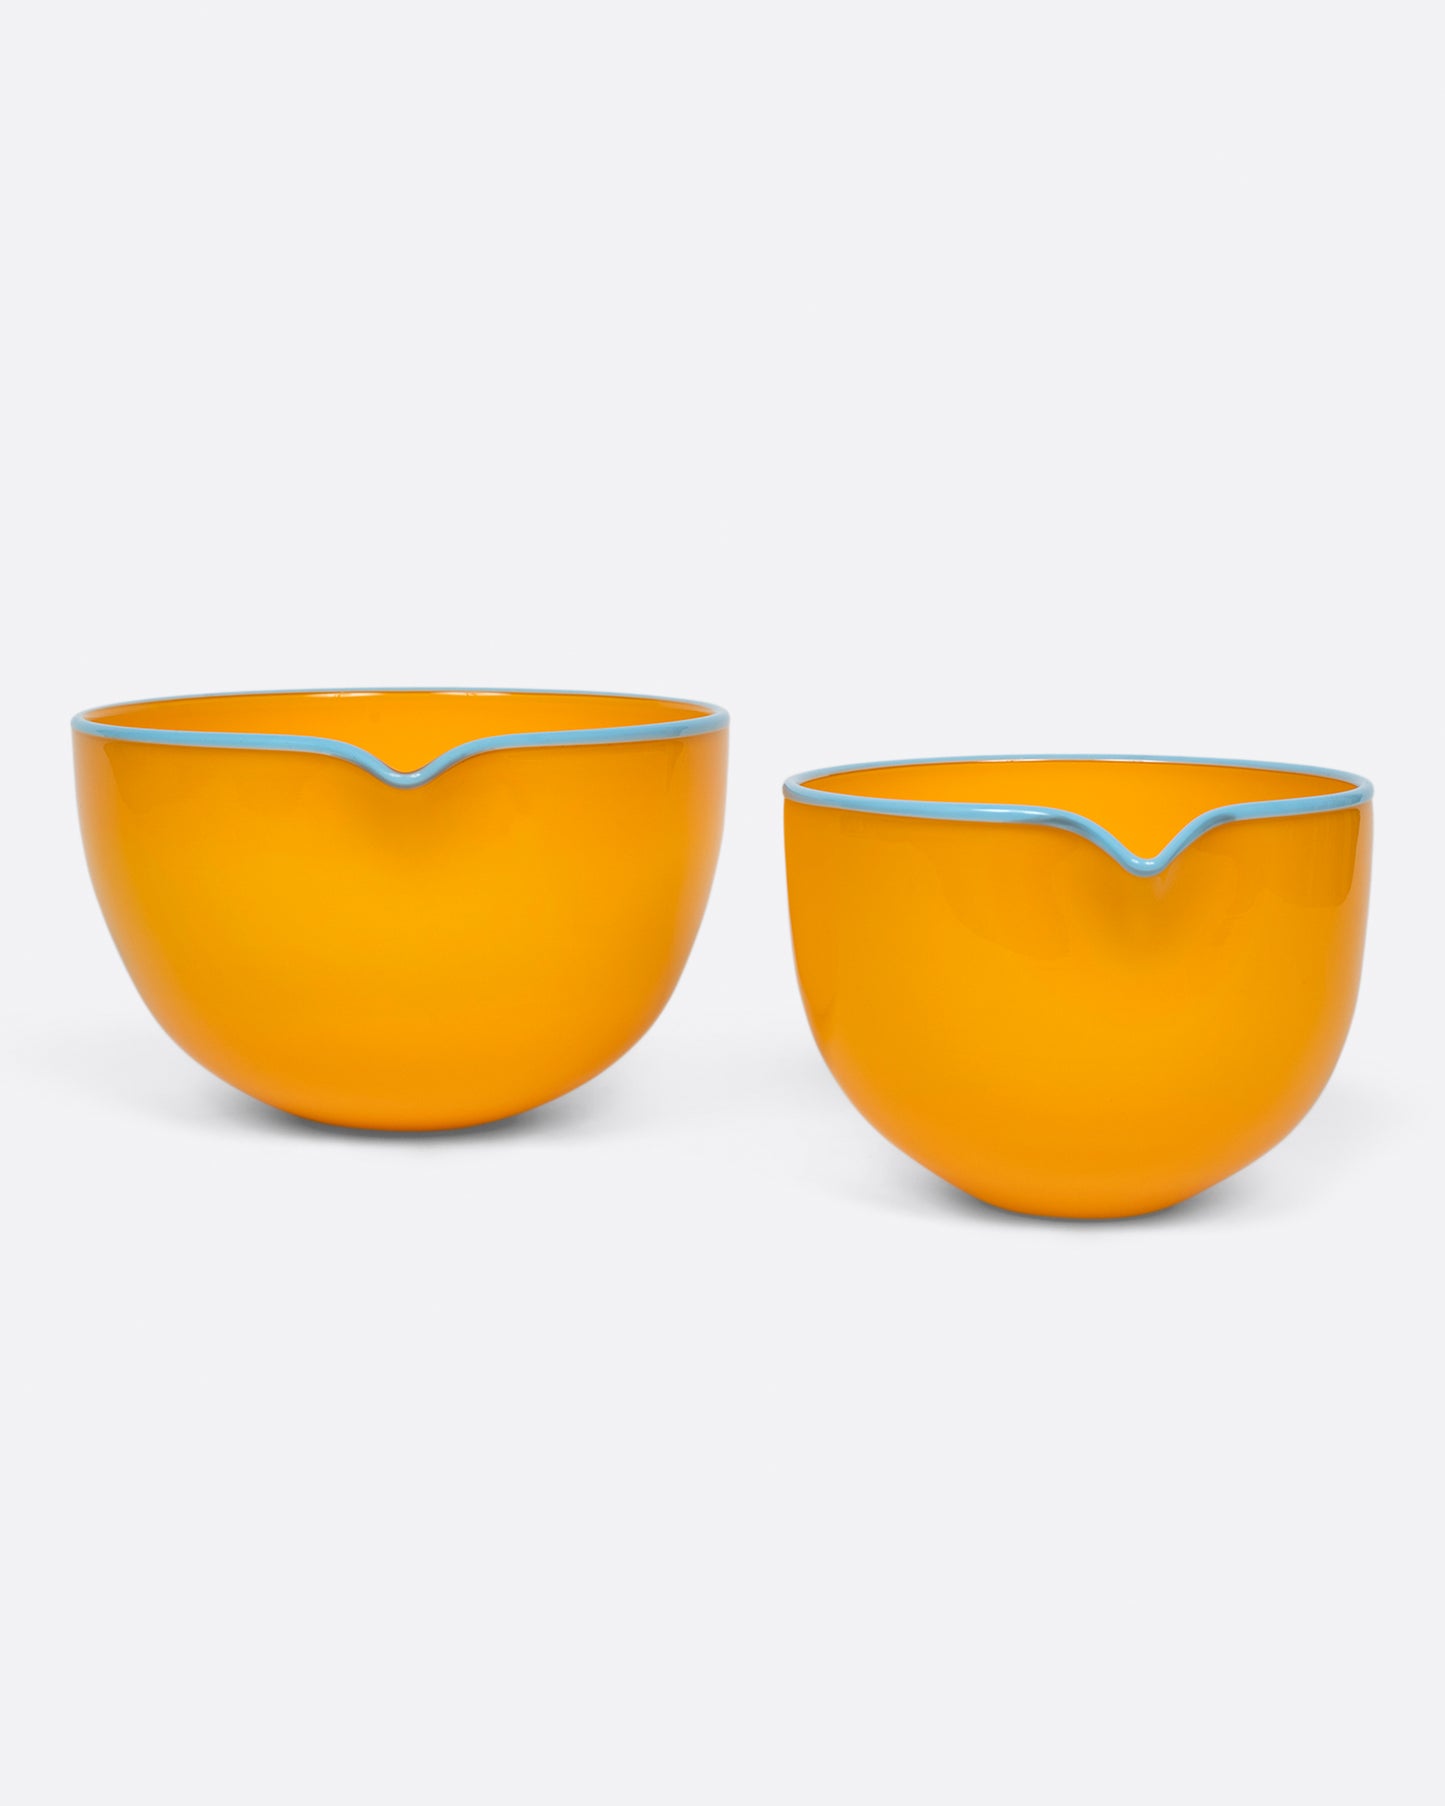 A small marigold spouted glass bowl shown next to a large marigold spouted bowl.